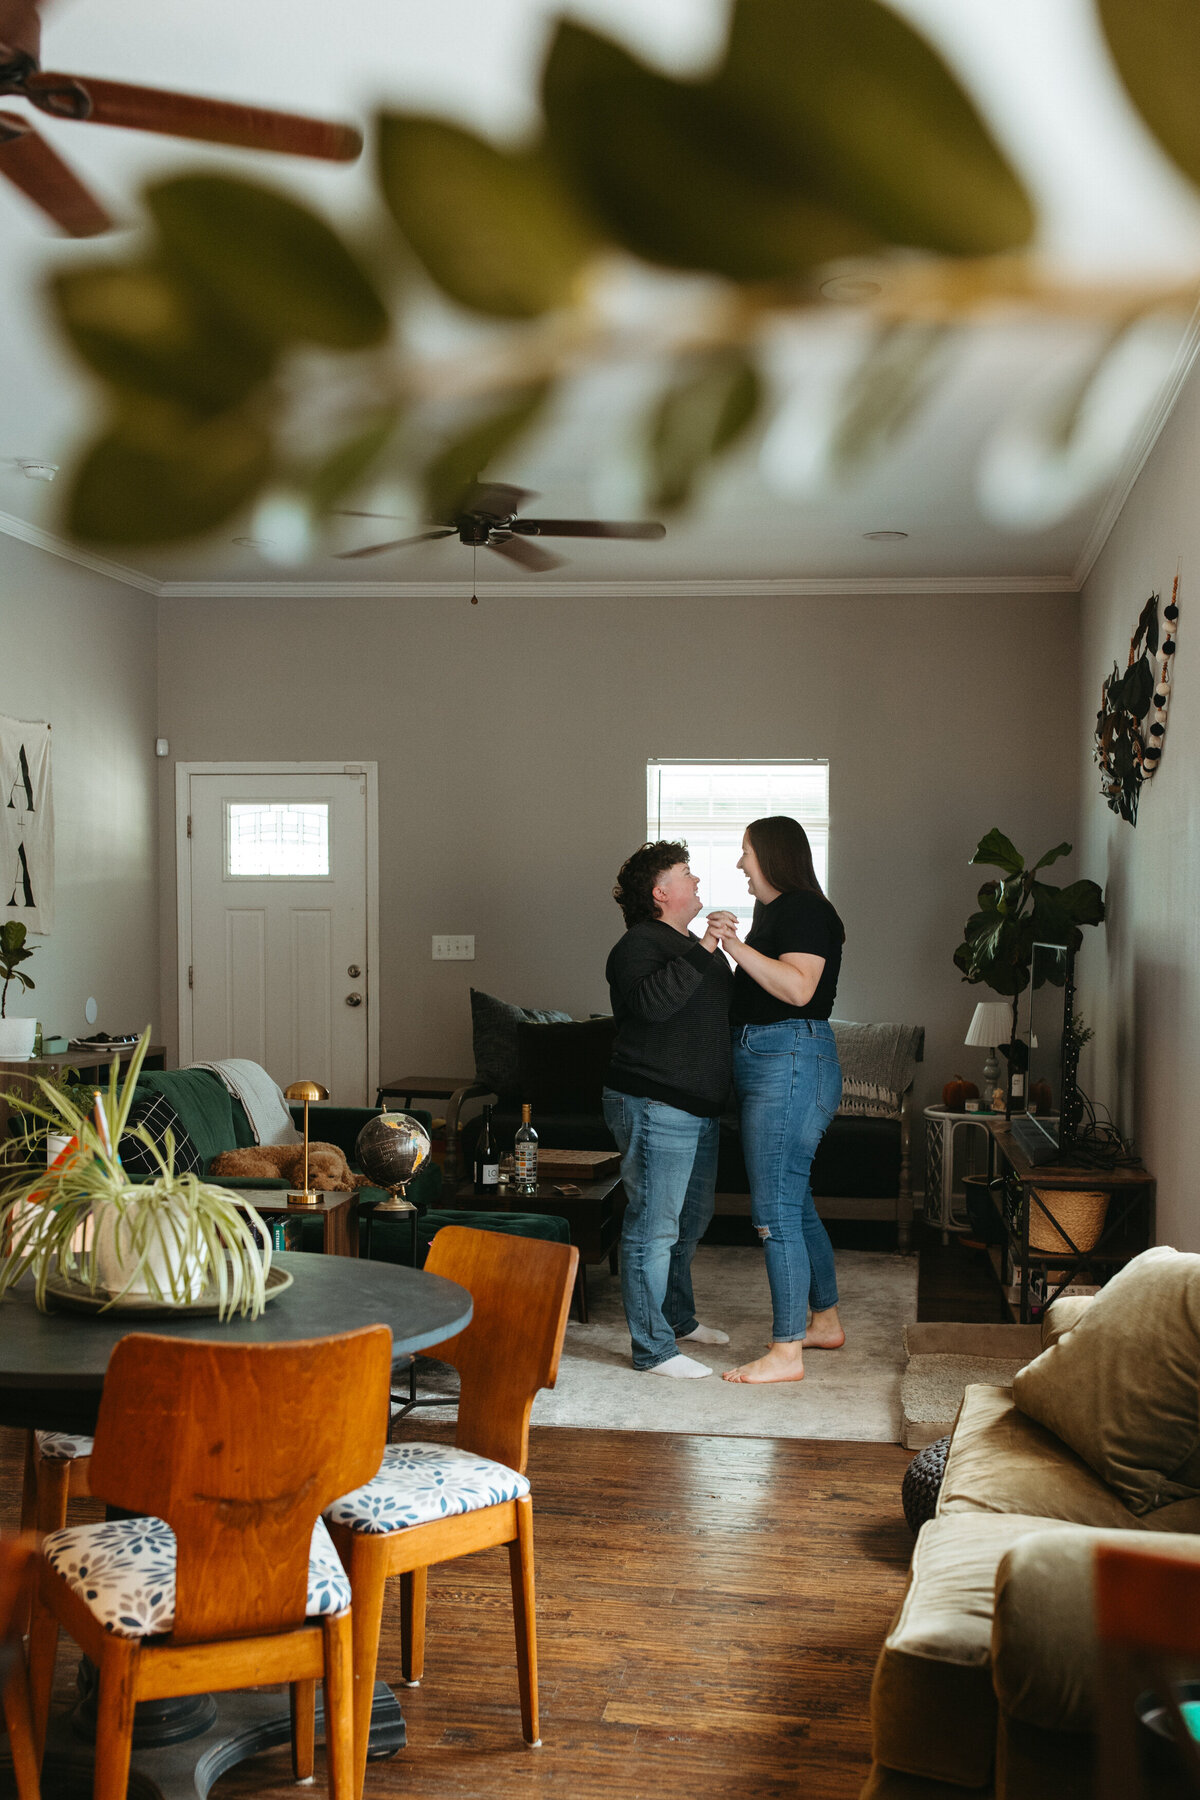 A candid shot from a living room perspective, capturing two individuals in a playful dance, surrounded by vibrant houseplants